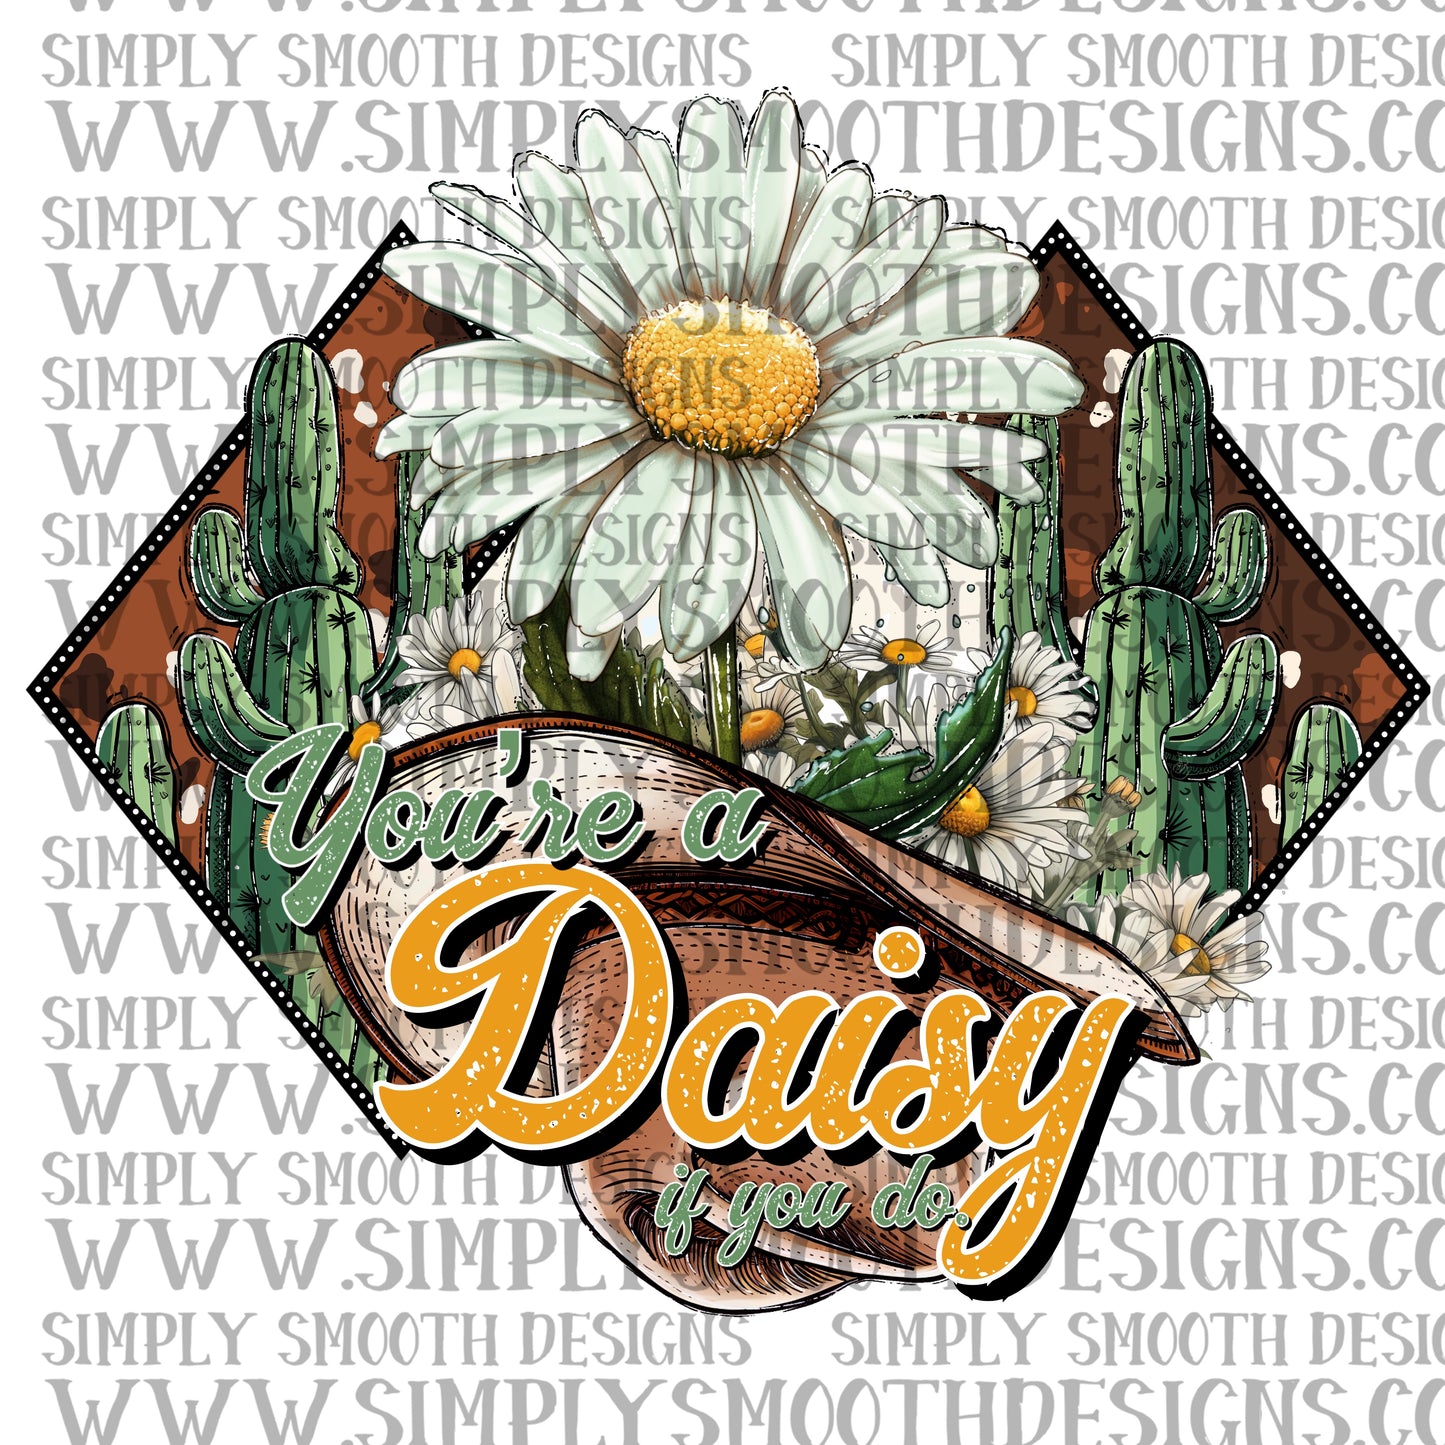 You’re a daisy if you do